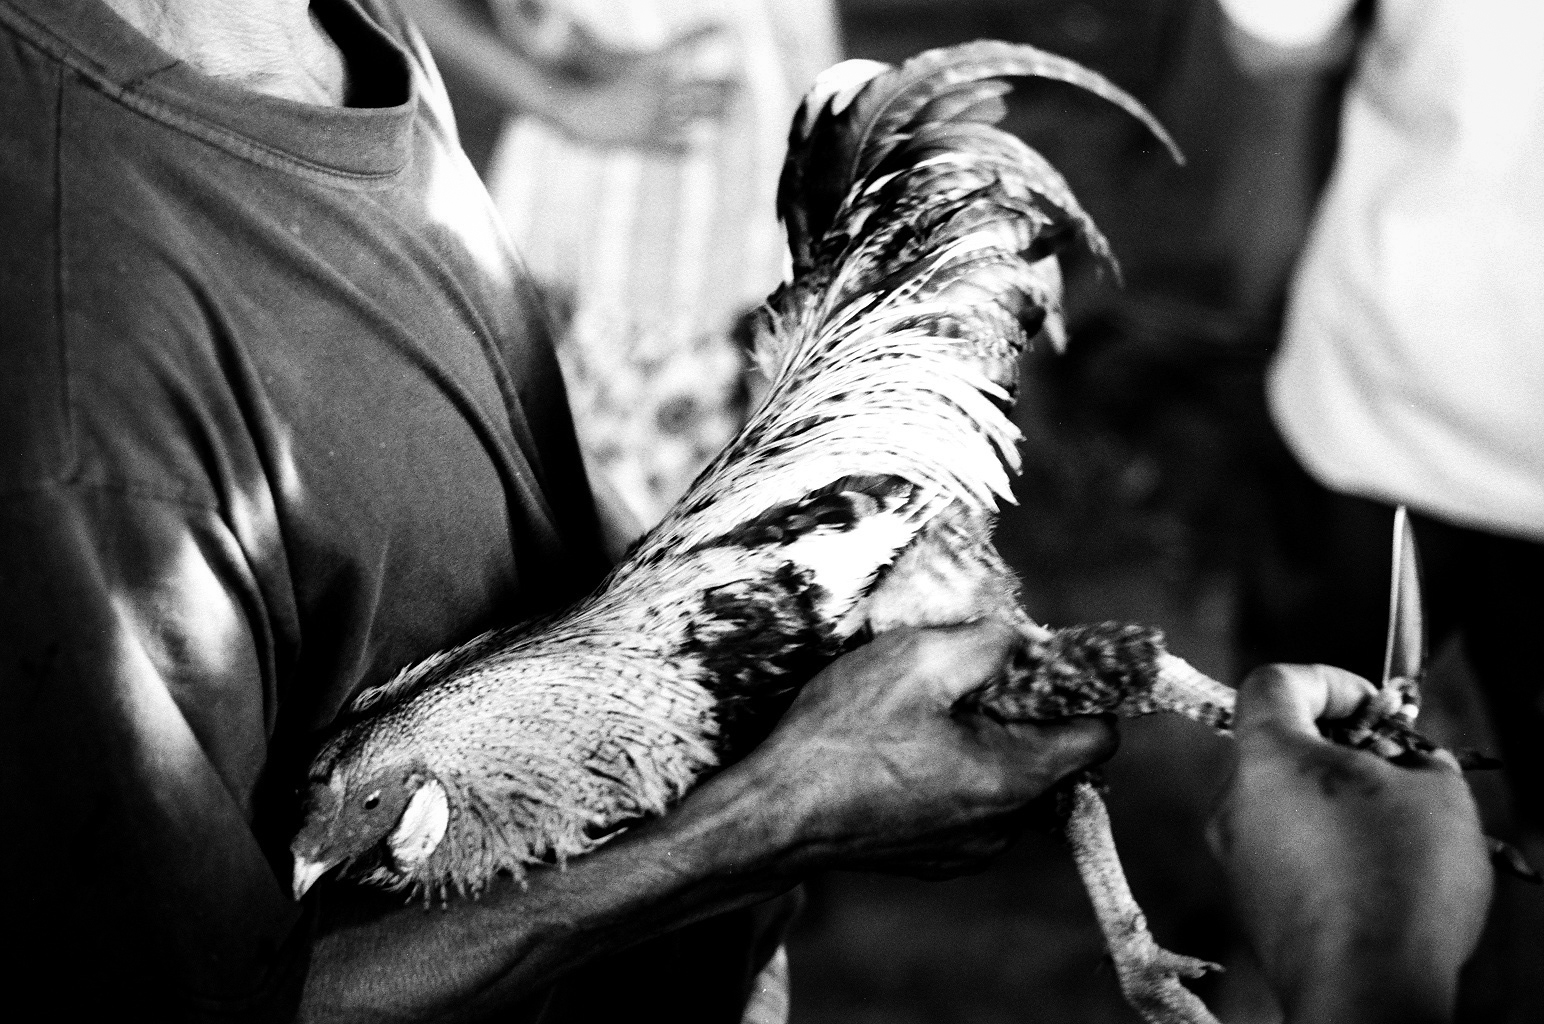  Amed, Bali, Indonesia. 2012.  The birds are prepped to fight by having a blade tied to one of their feet with string. 